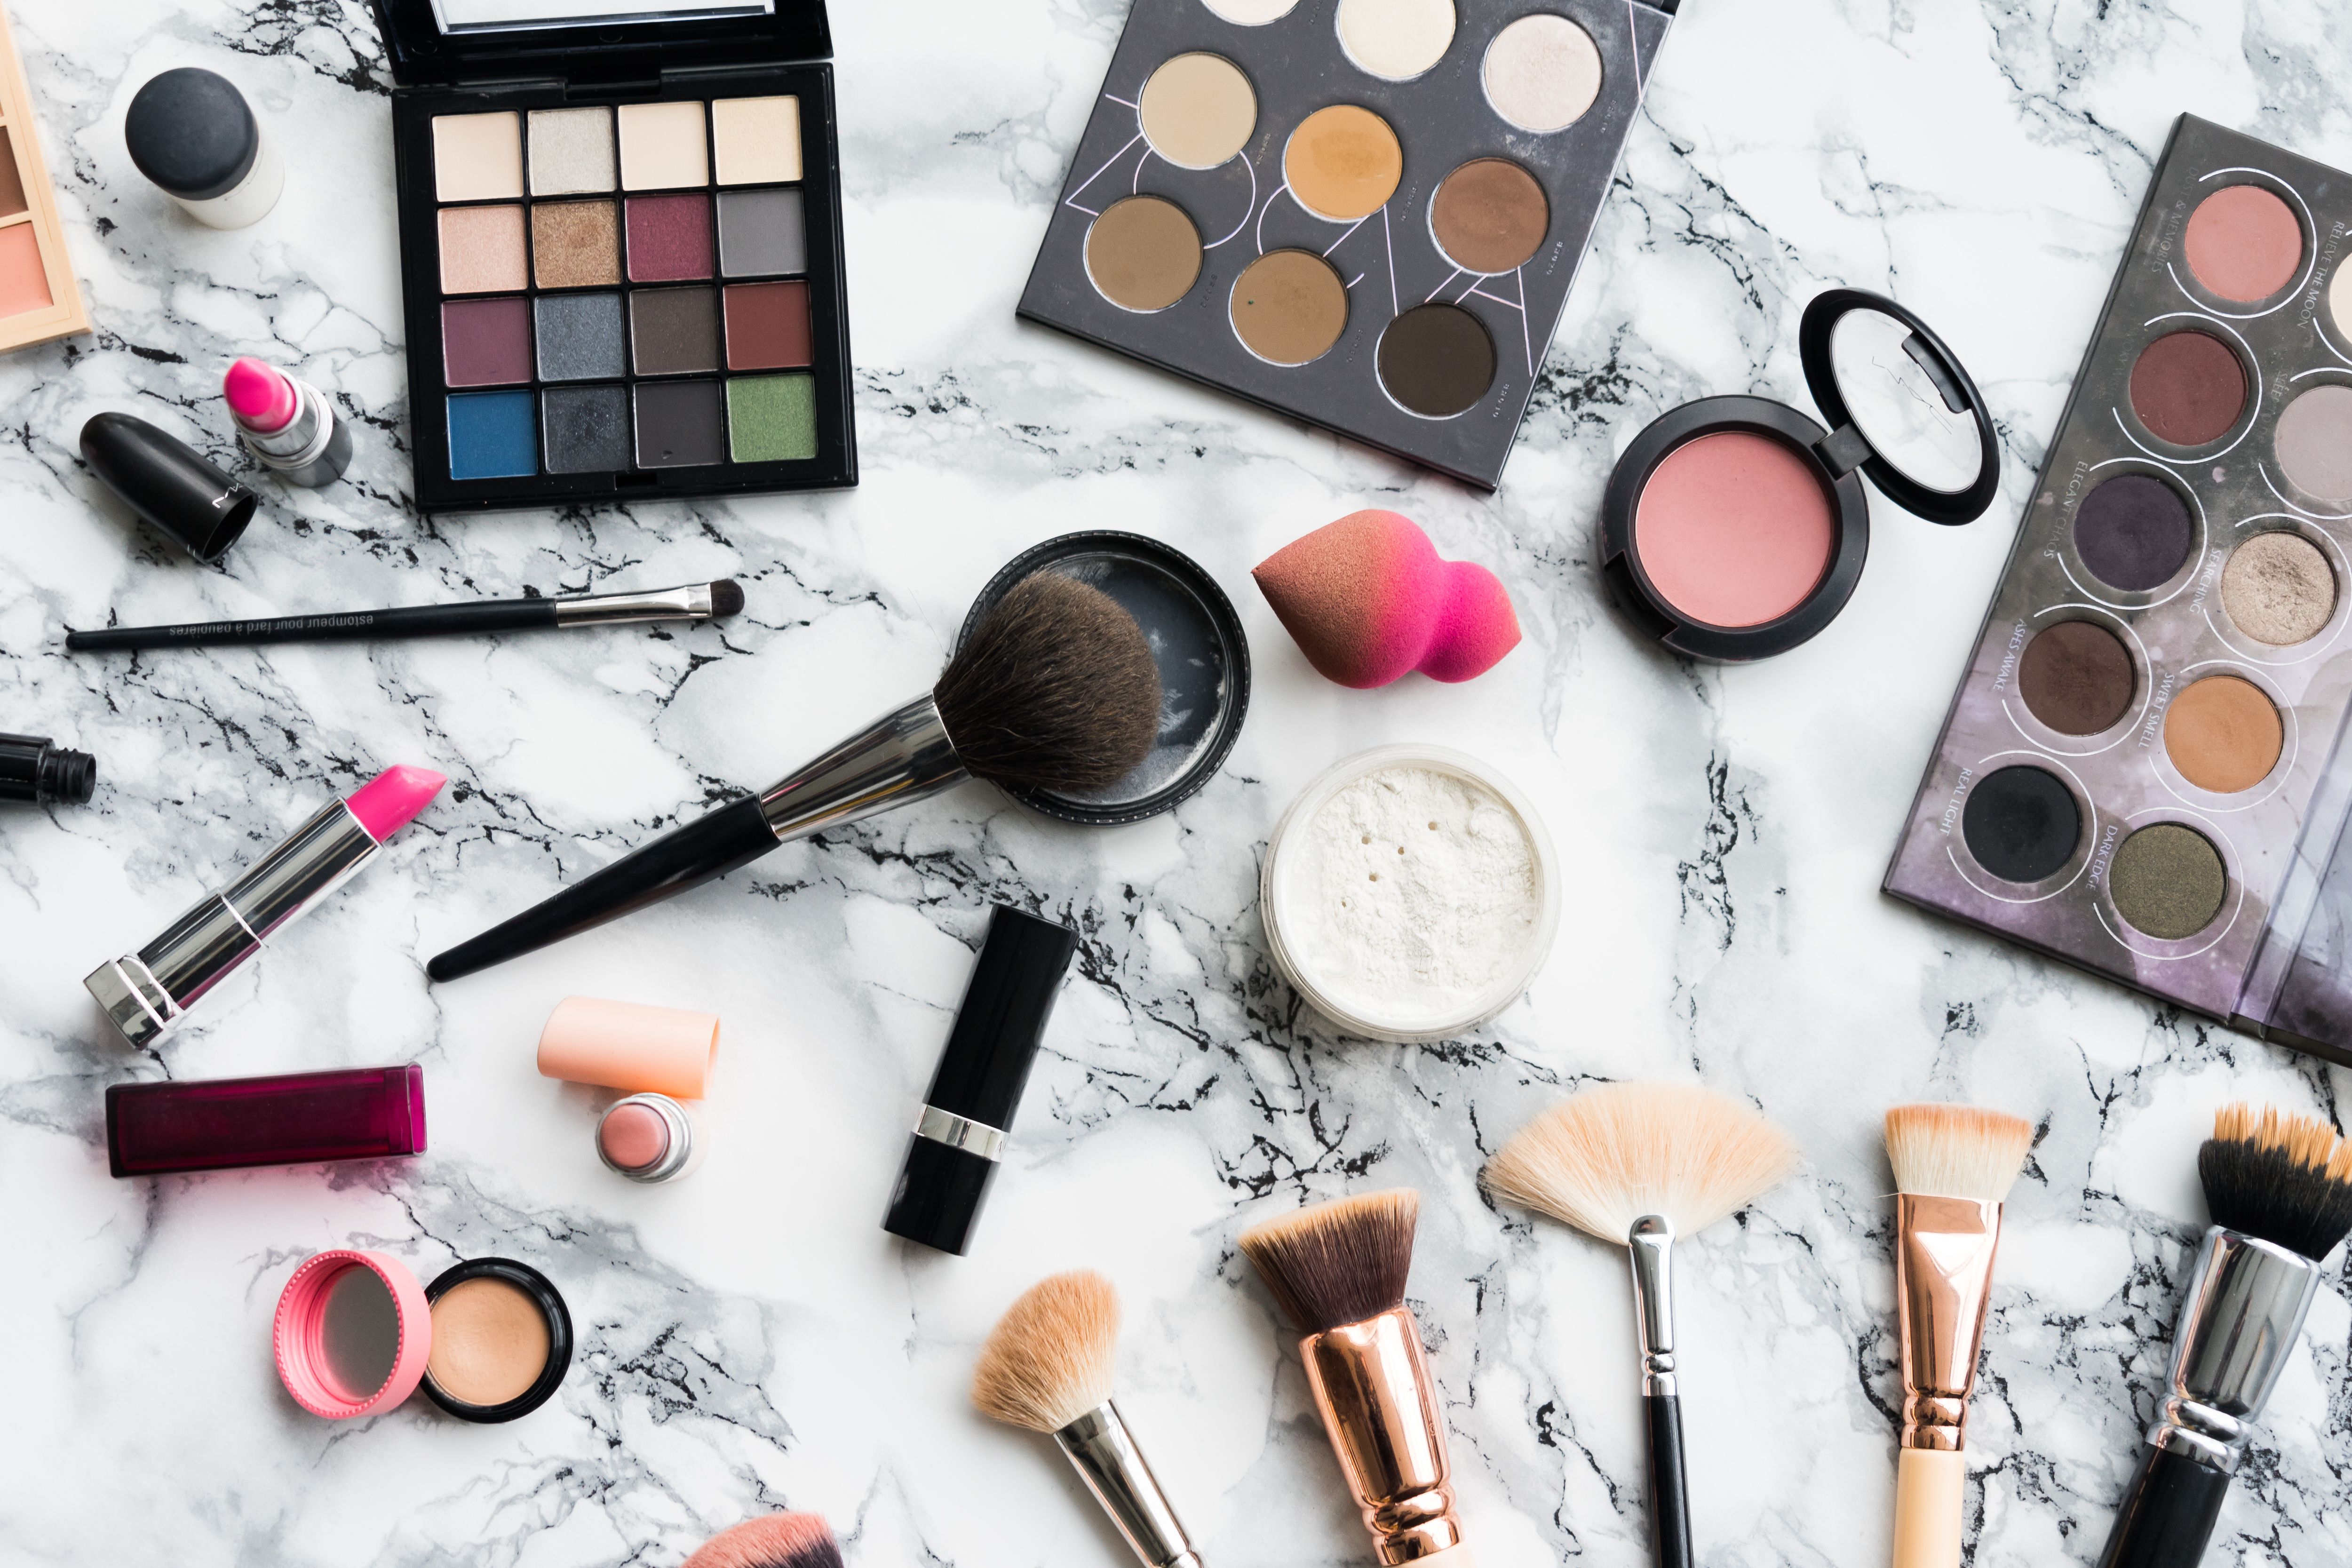 Various makeup products such as foundation, eye shadow, lipstick, and brushes on a marble surface. - Makeup